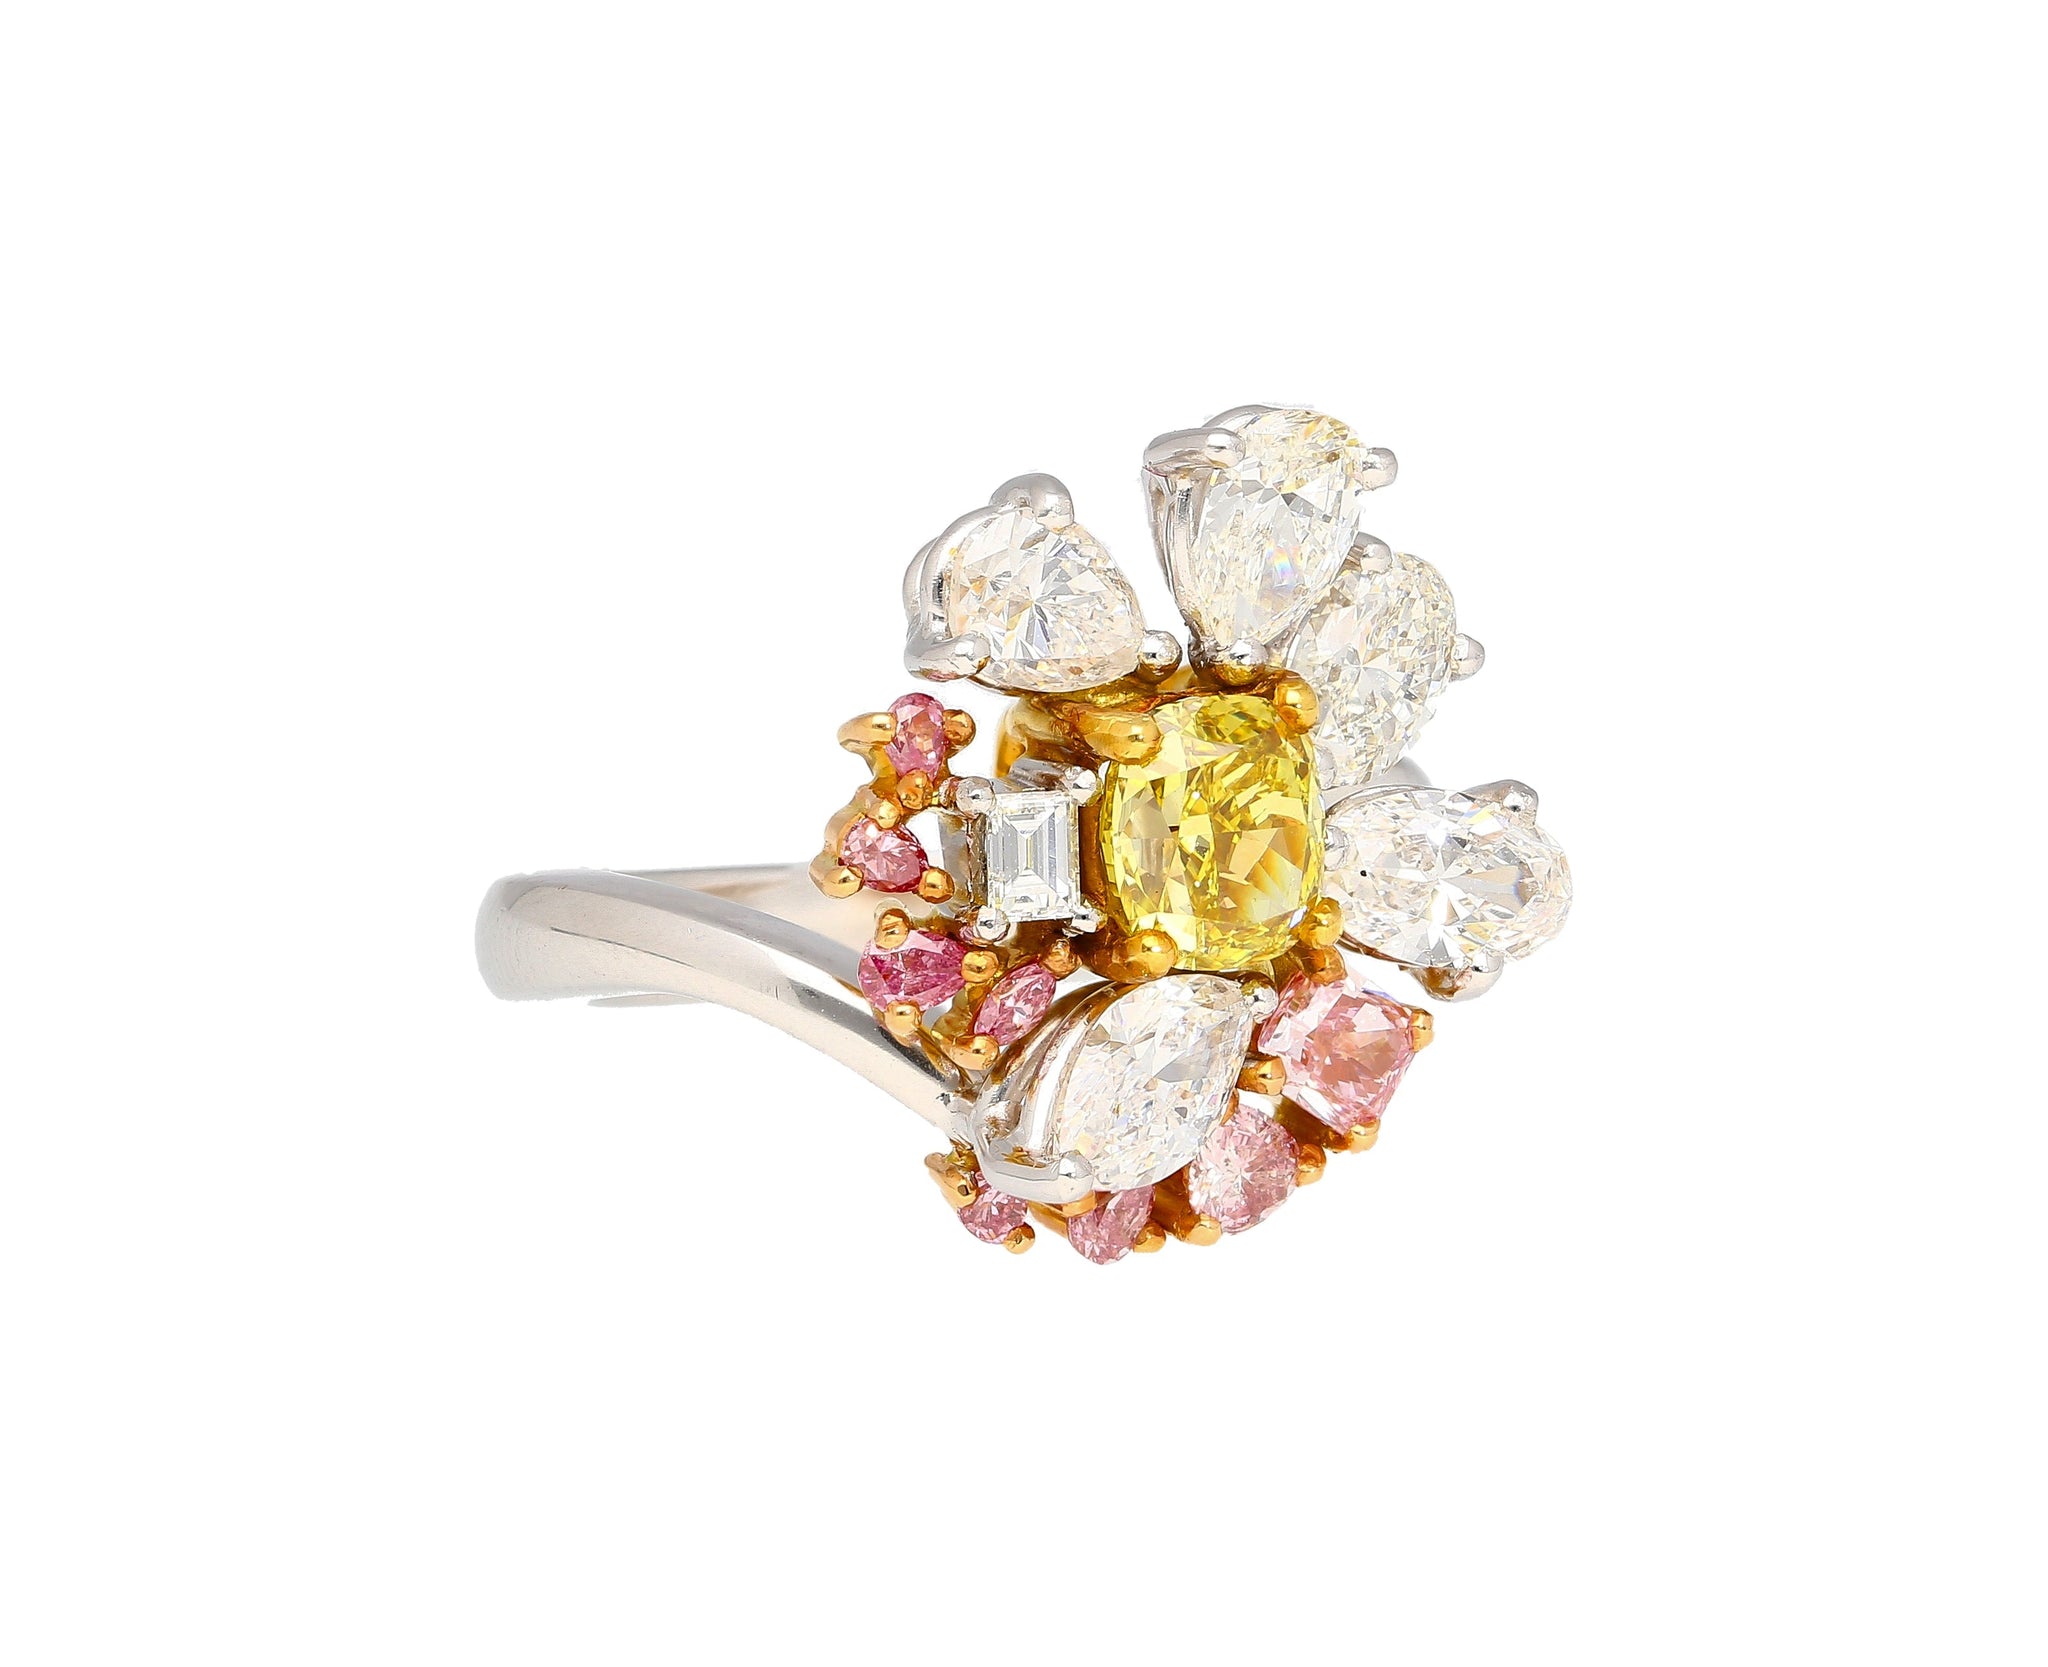 GIA Certified Fancy Yellow Cushion Cut Diamond with Pink and White Diamond Side Stones in Platinum 950 & 18K White Gold